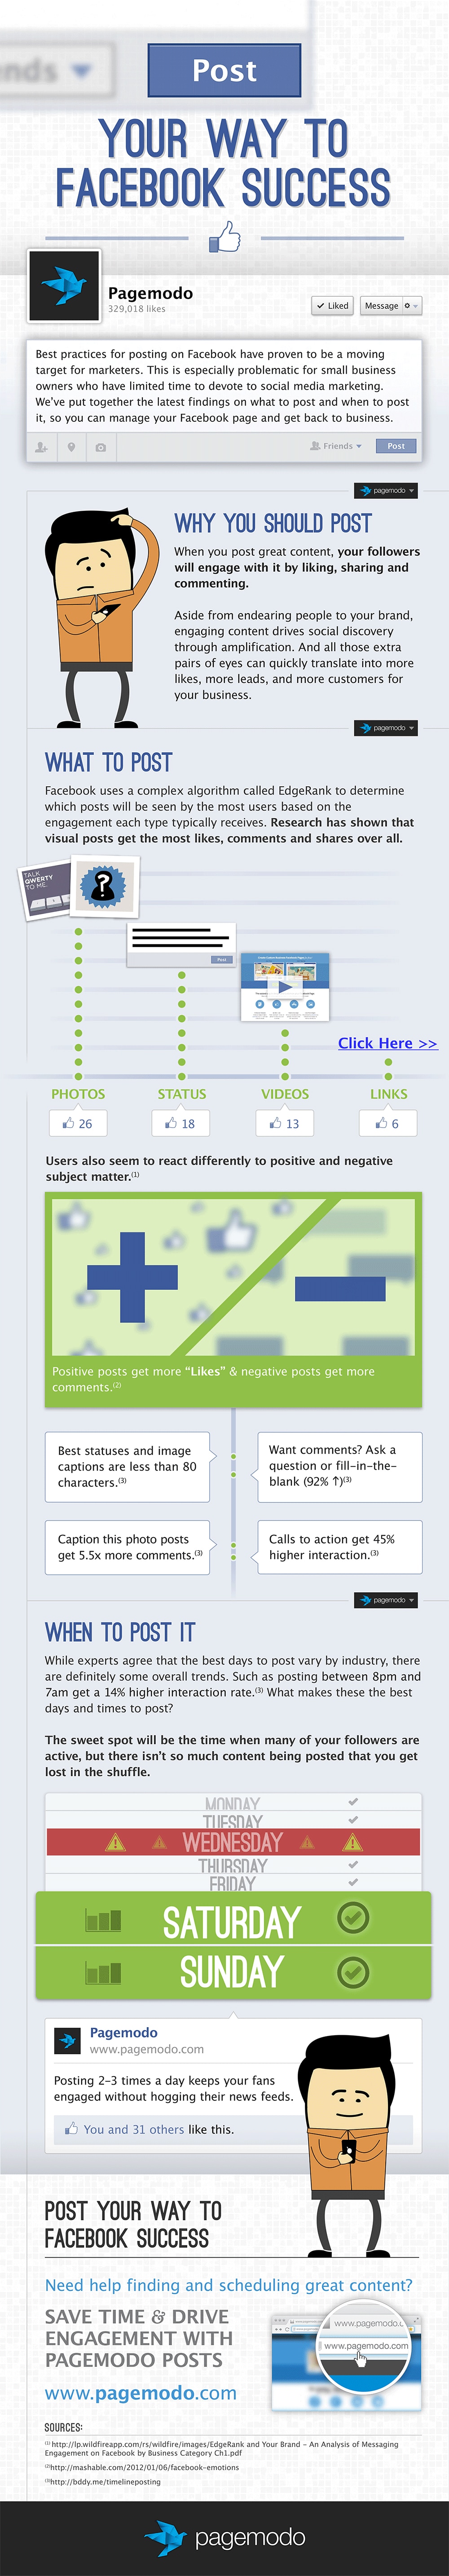 Facebook Success: The Why, What & When To Post Guide [Infographic]